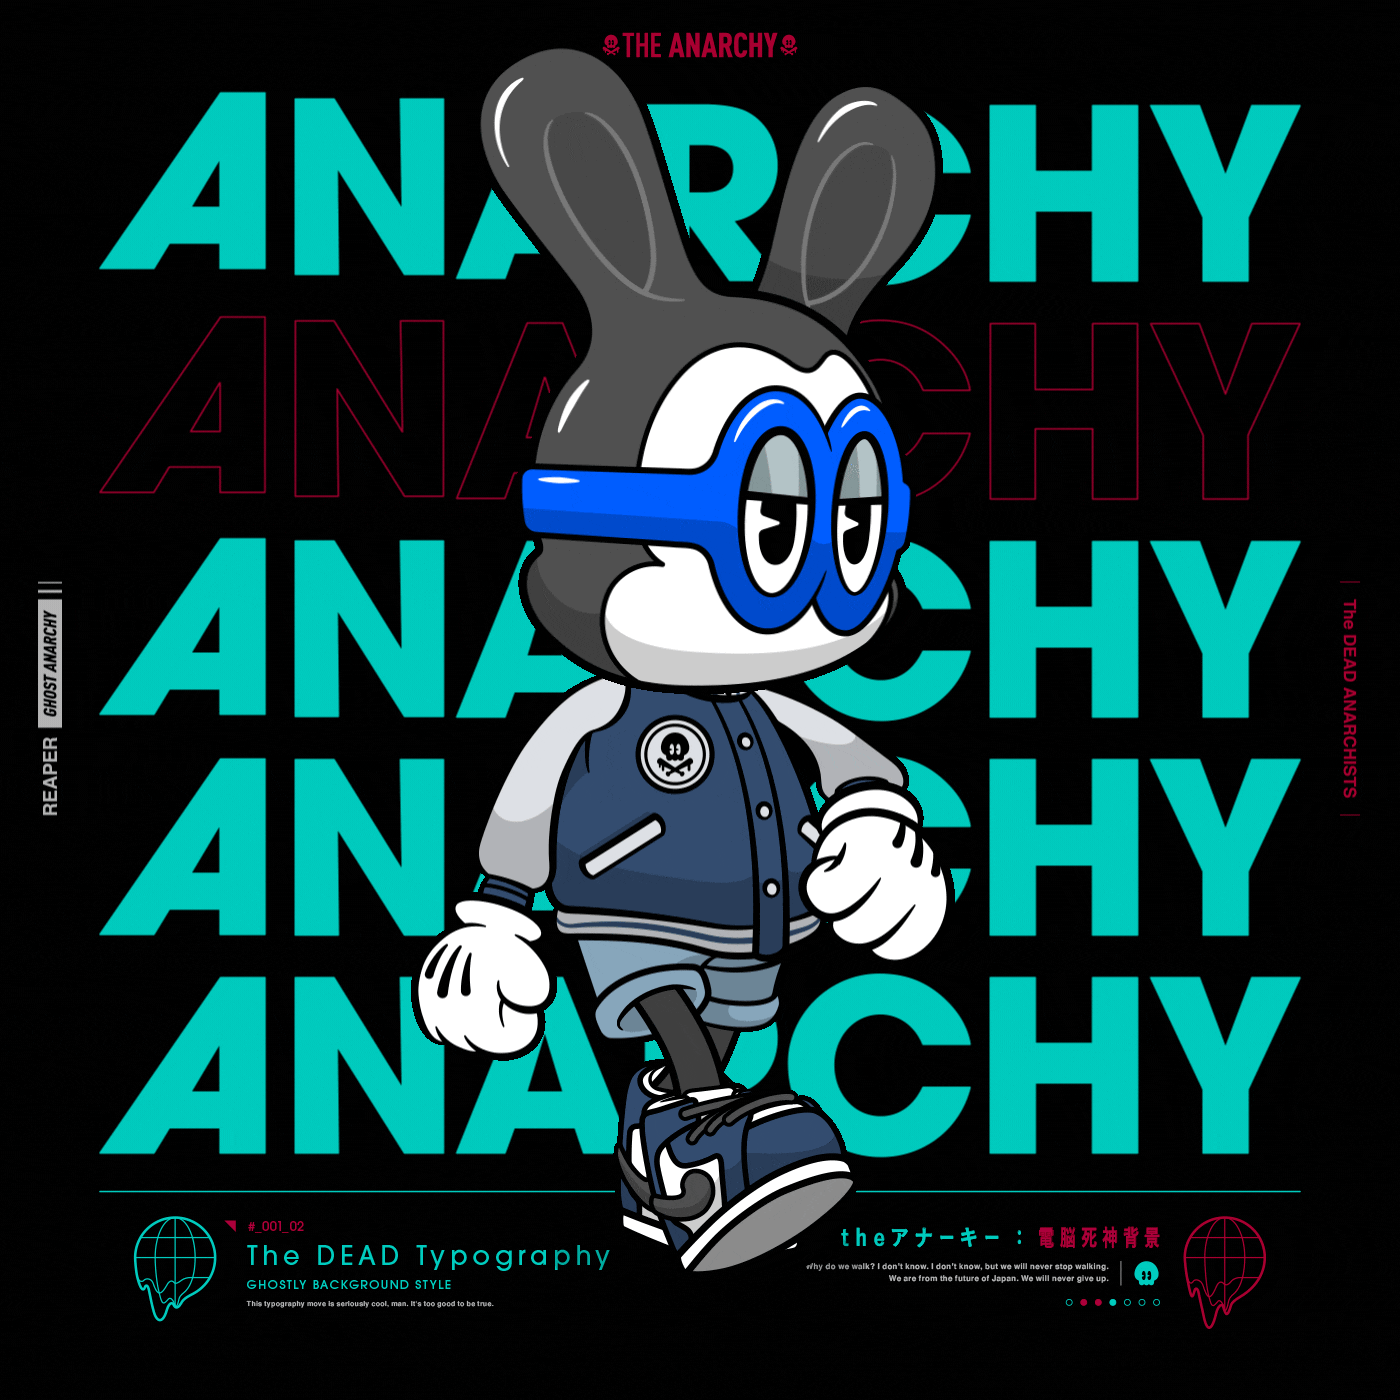 The ANARCHY #0145